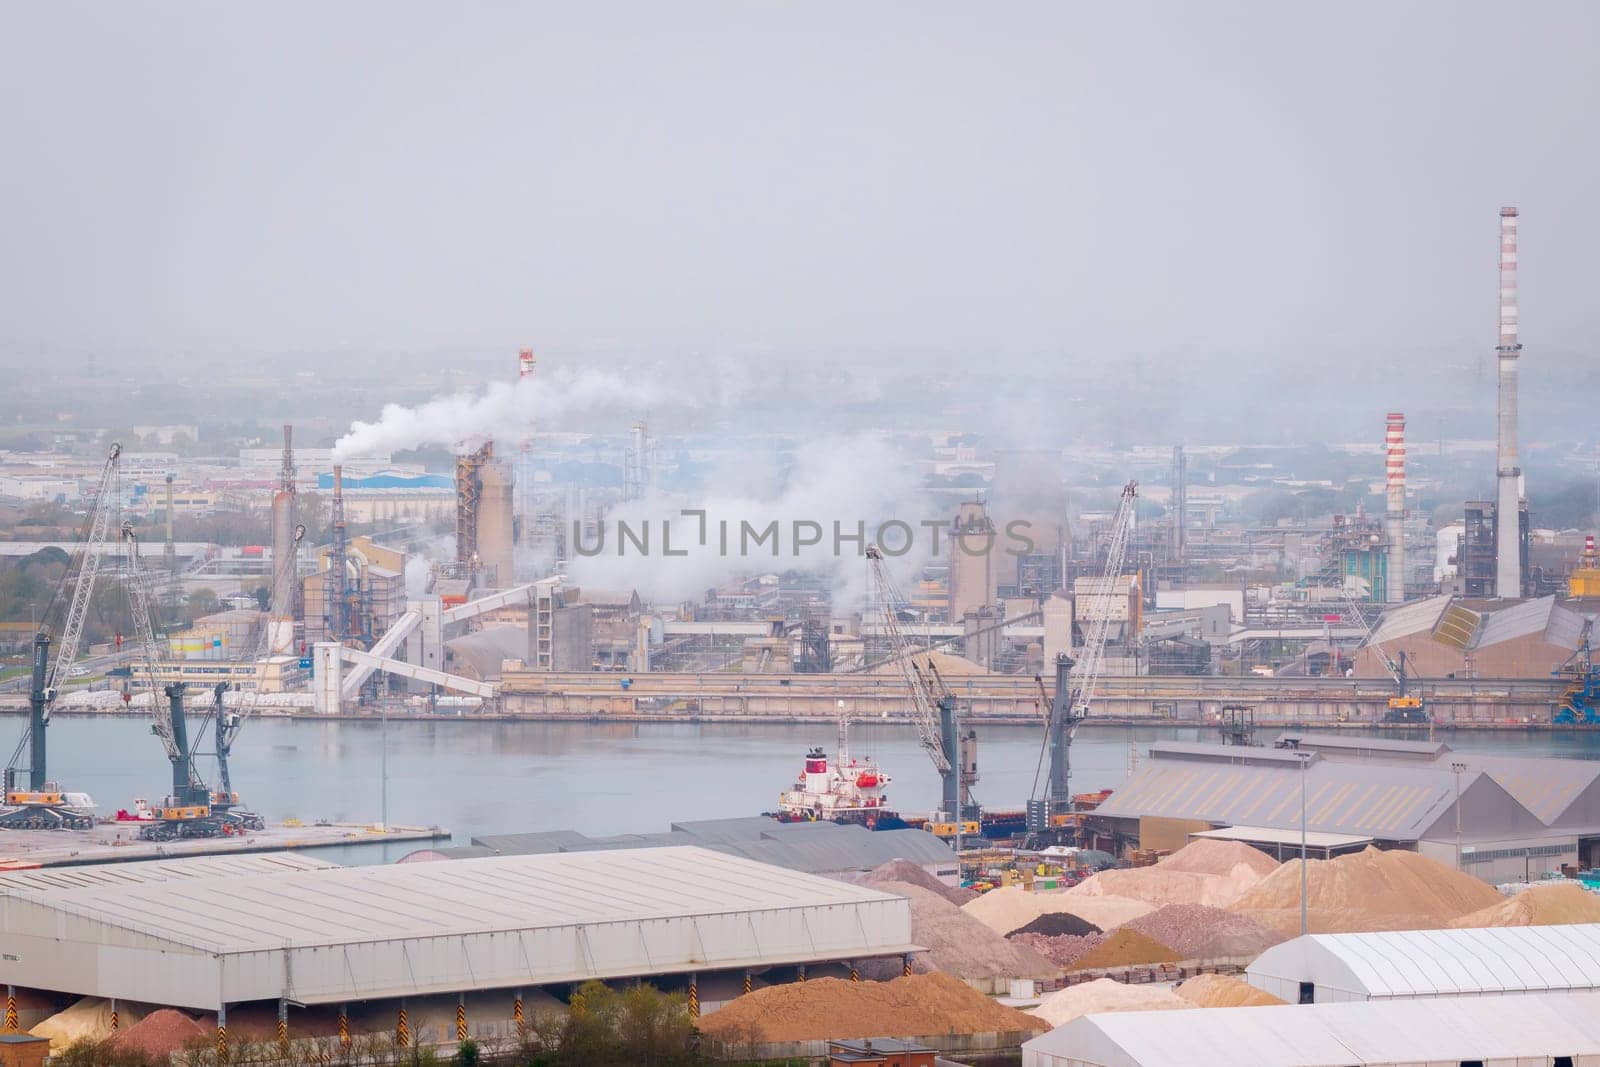 drone view of hydrocarbon refinery and liquefied natural gas tanks at cloudy day by Robertobinetti70